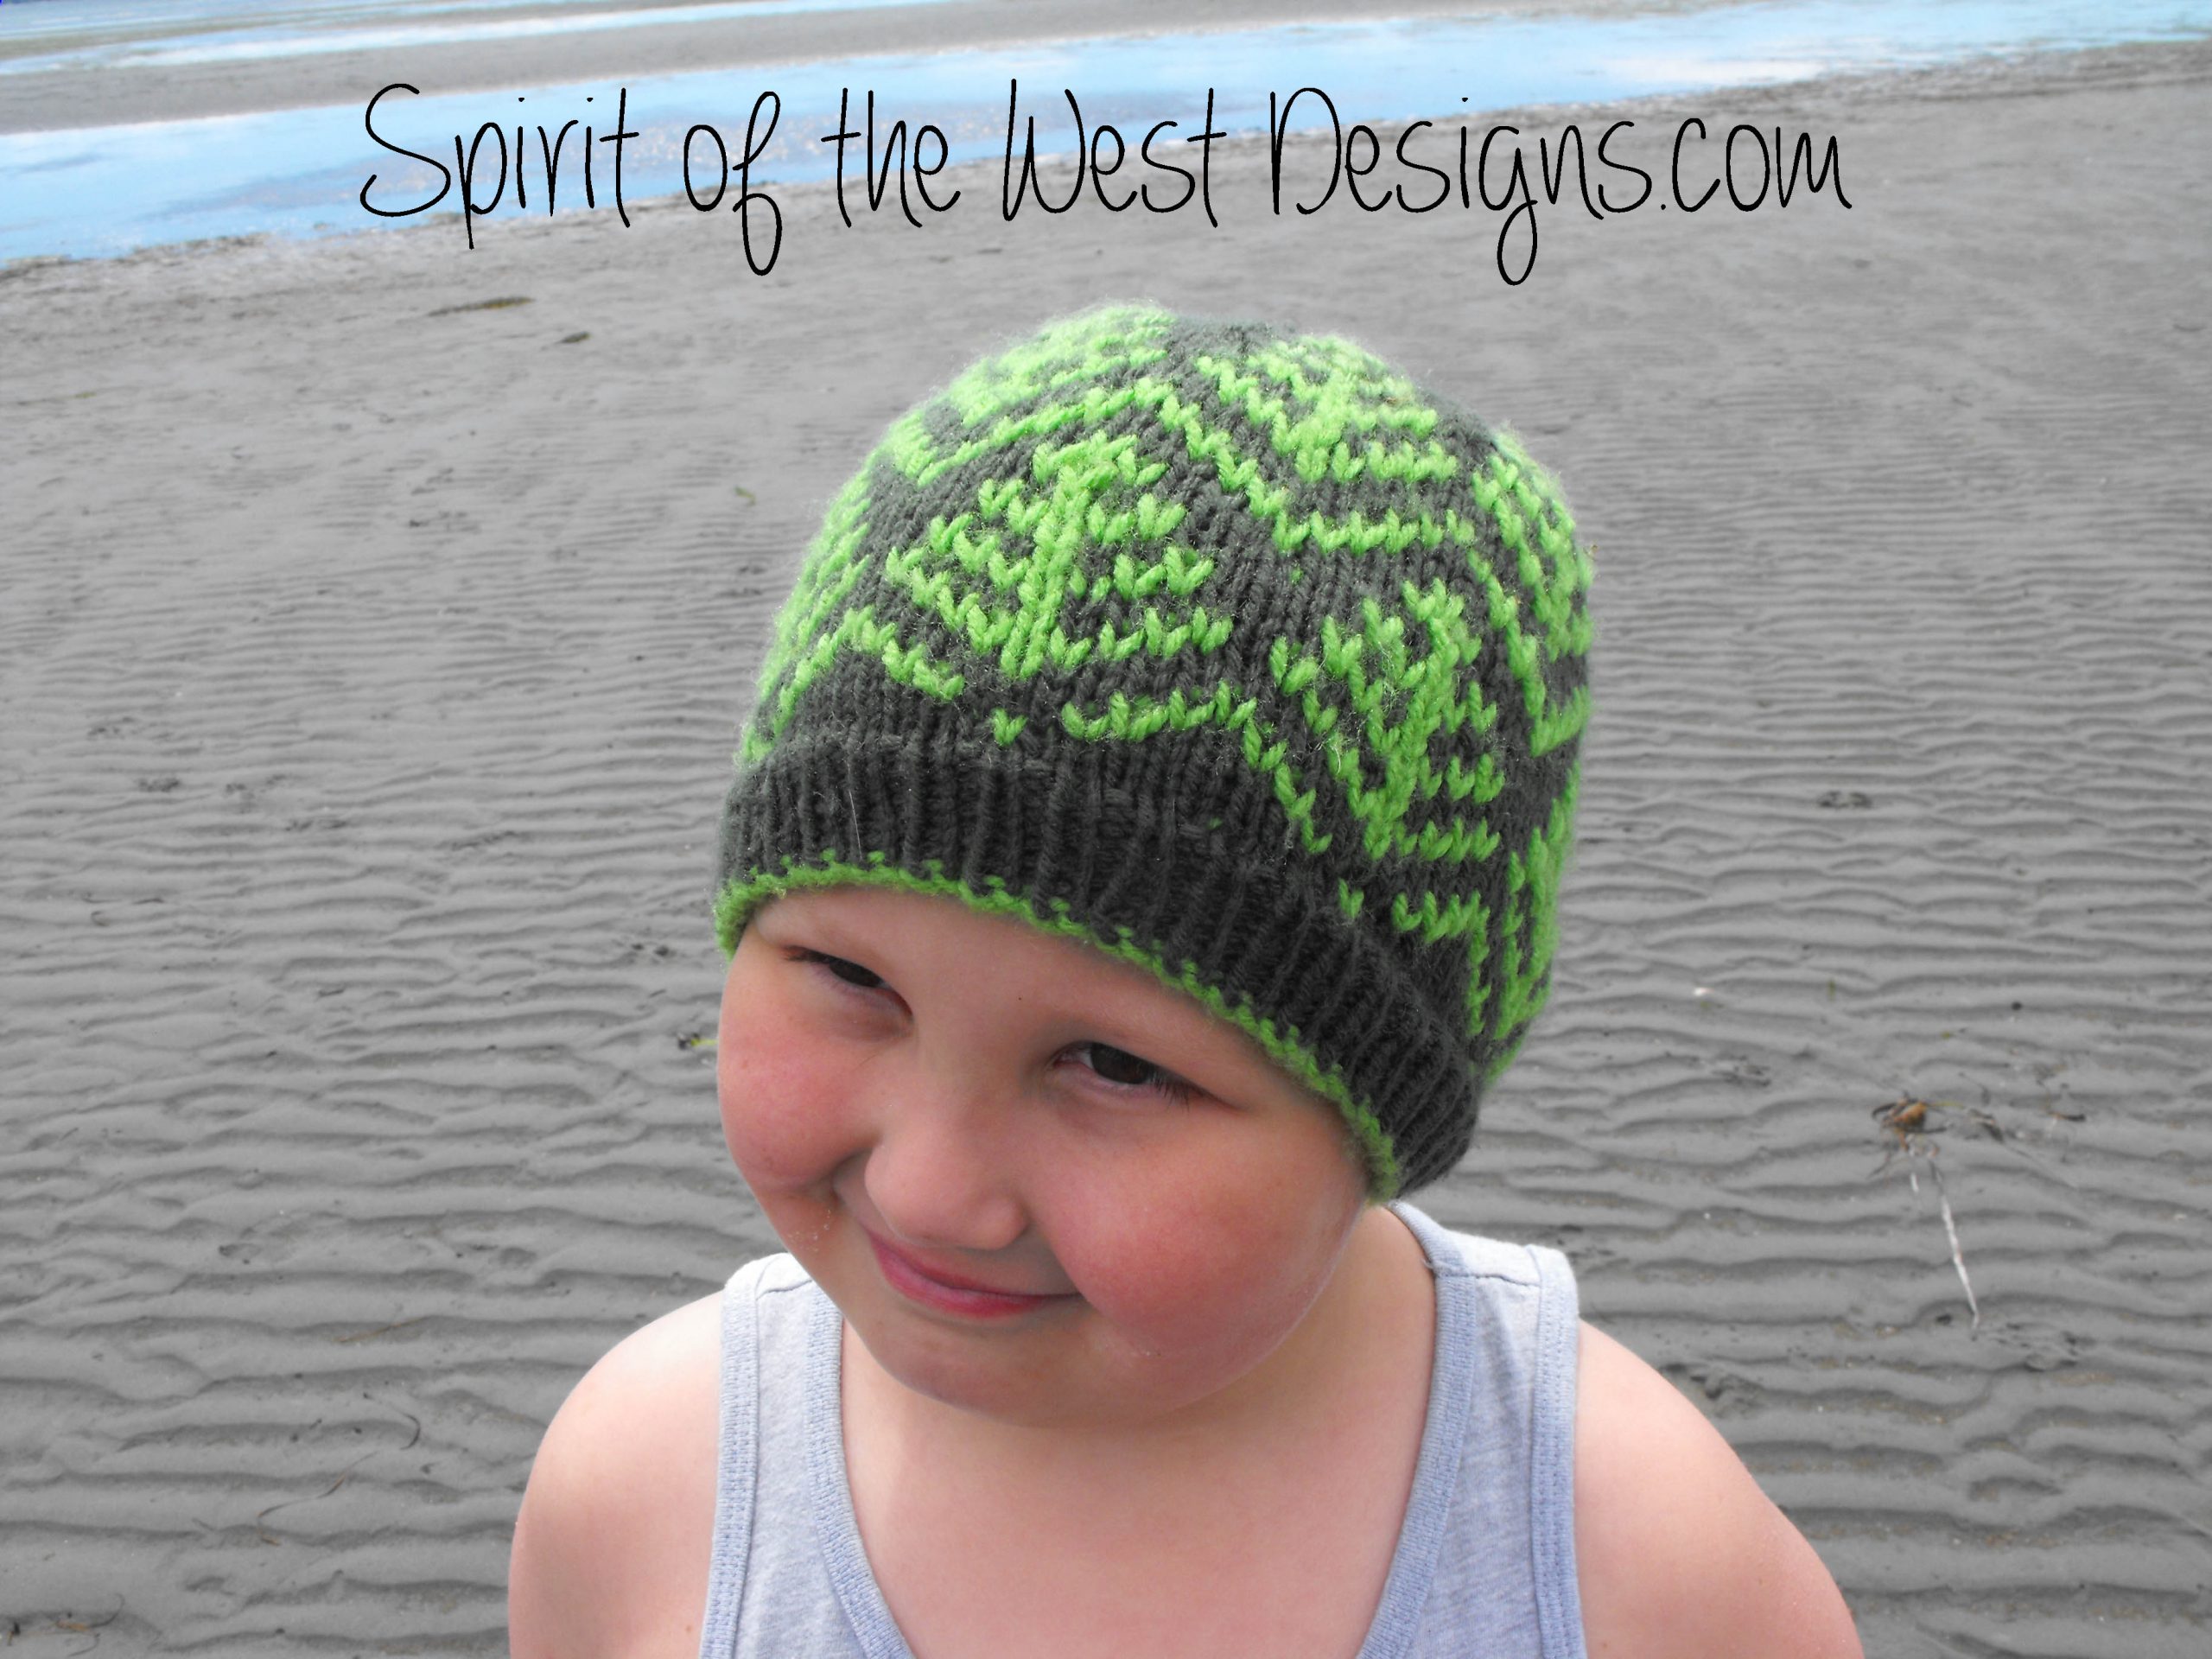 Forevergreen Hat Knitting Pattern, Stranded beanie knit pattern, touque with a tree